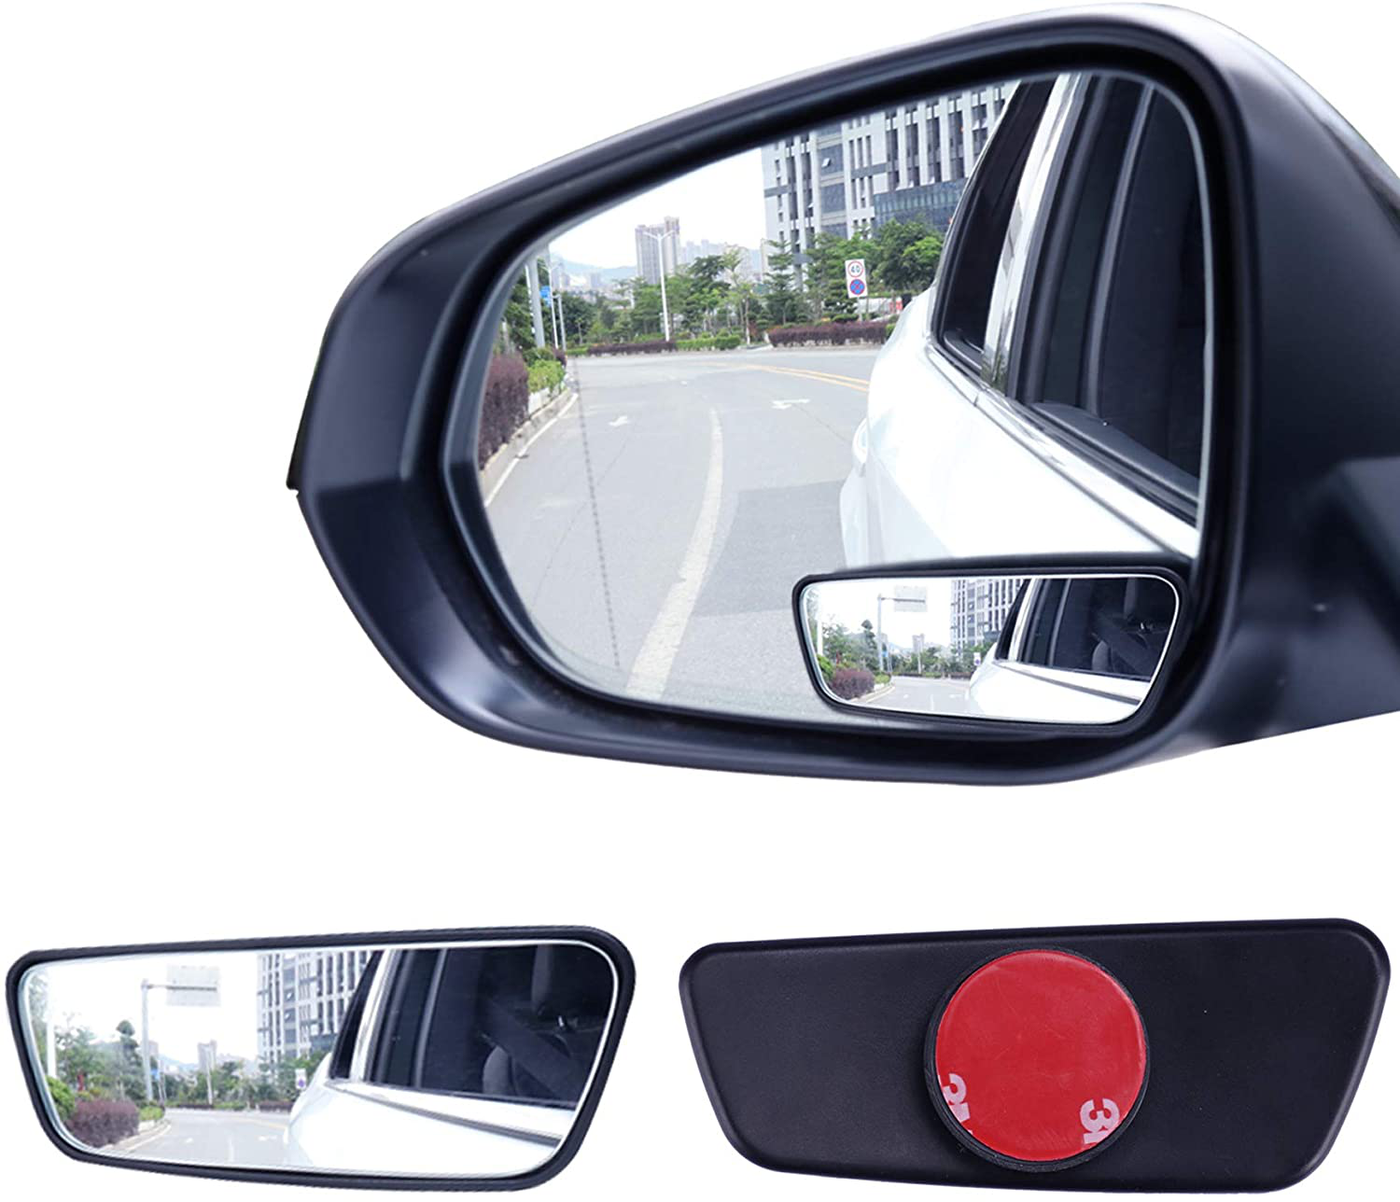 Framed Rectangular Blind Spot Mirror, HD Glass and ABS Housing Convex Wide Angle Rearview Mirror with Adjustable Stick for Universal Car